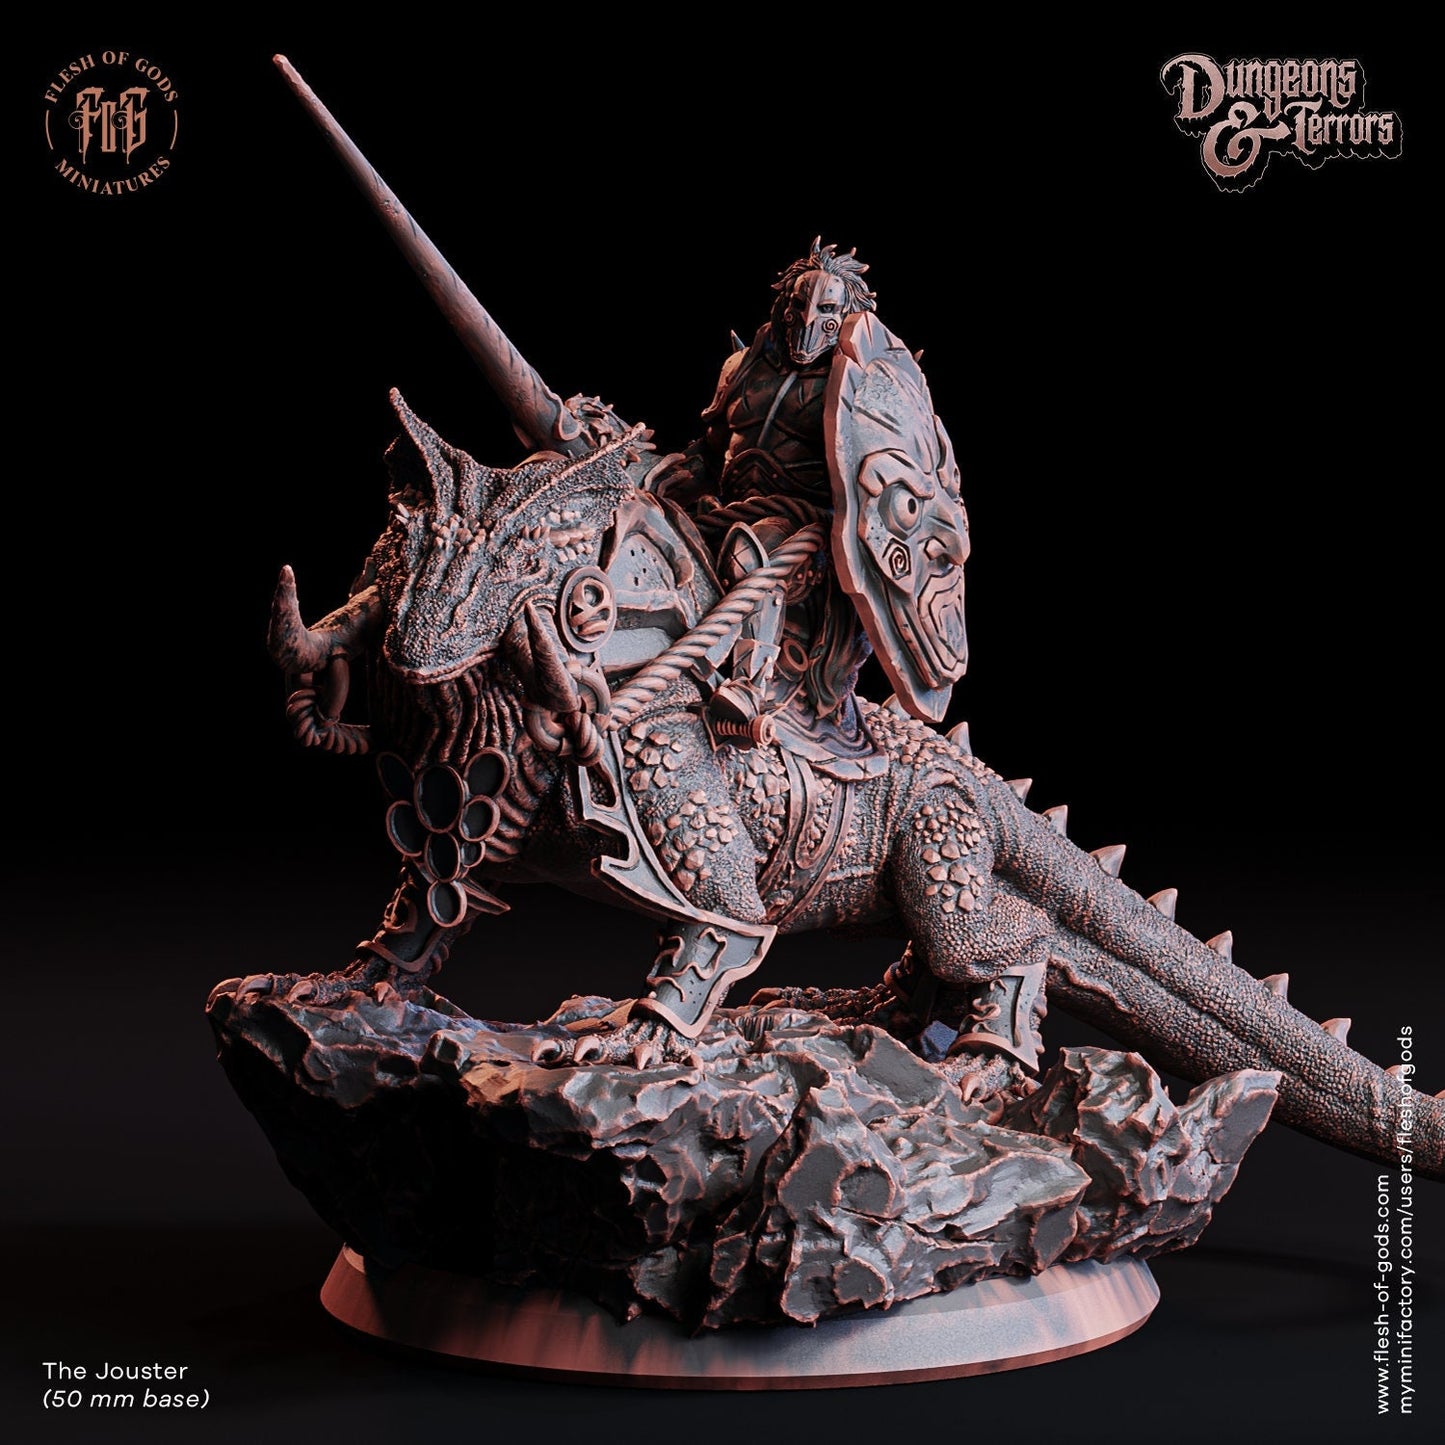 The Jouster | Flesh of Gods | Enemy | 3D Printed Resin Miniature | Dungeons and Dragons | Pathfinder | Tabletop Role Playing | D&D